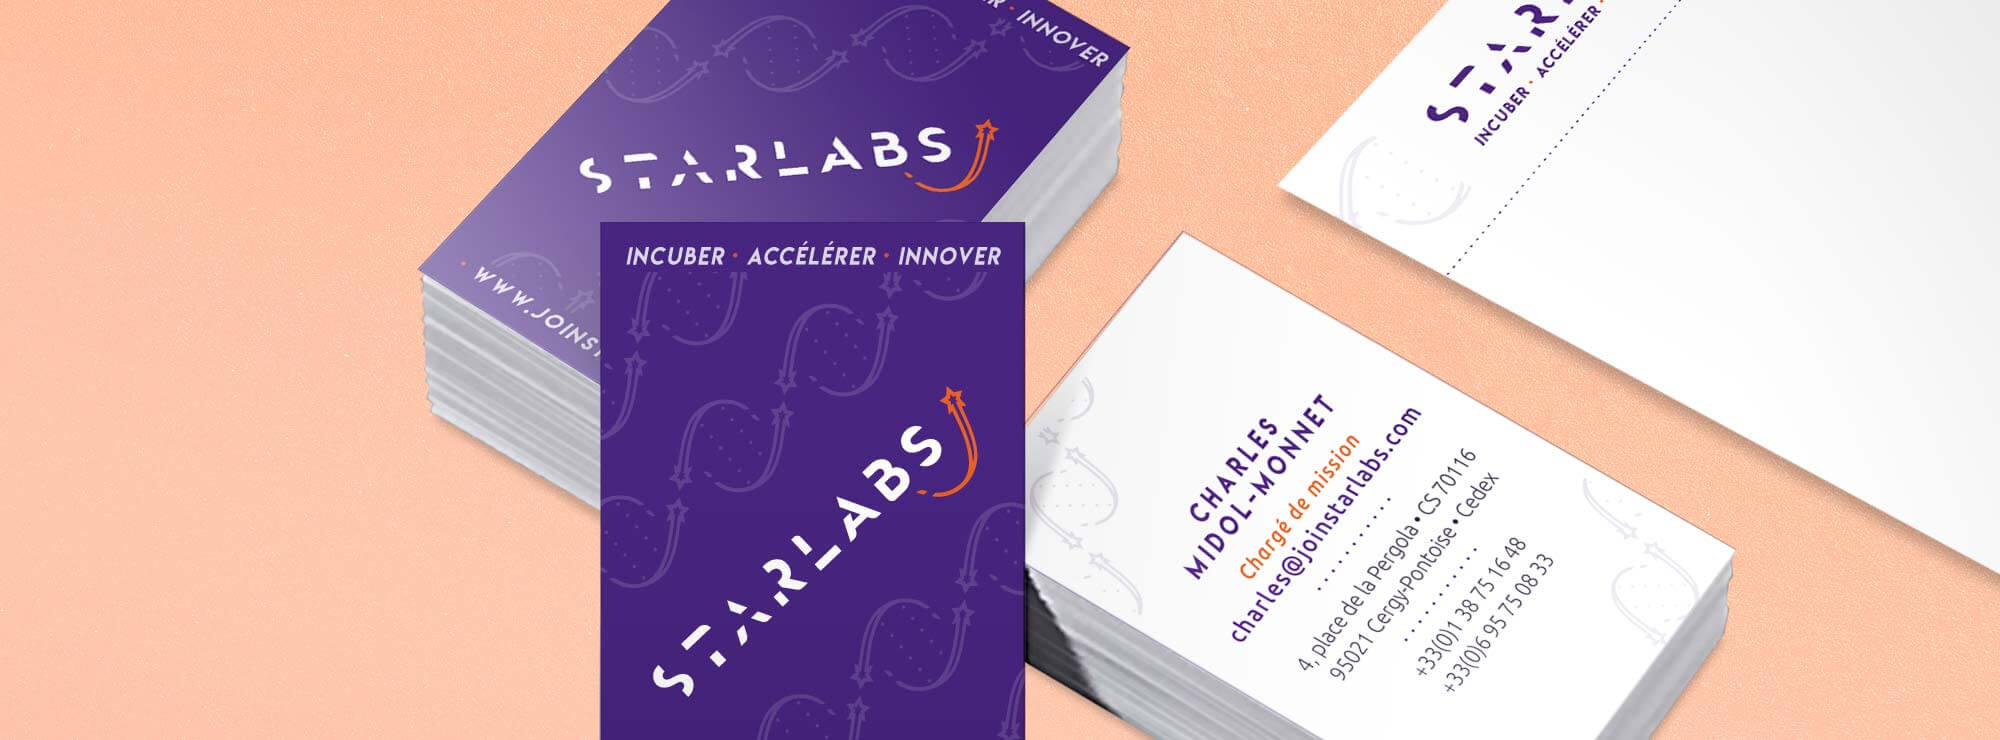 Starlabs - a logo that doesn’t just pass